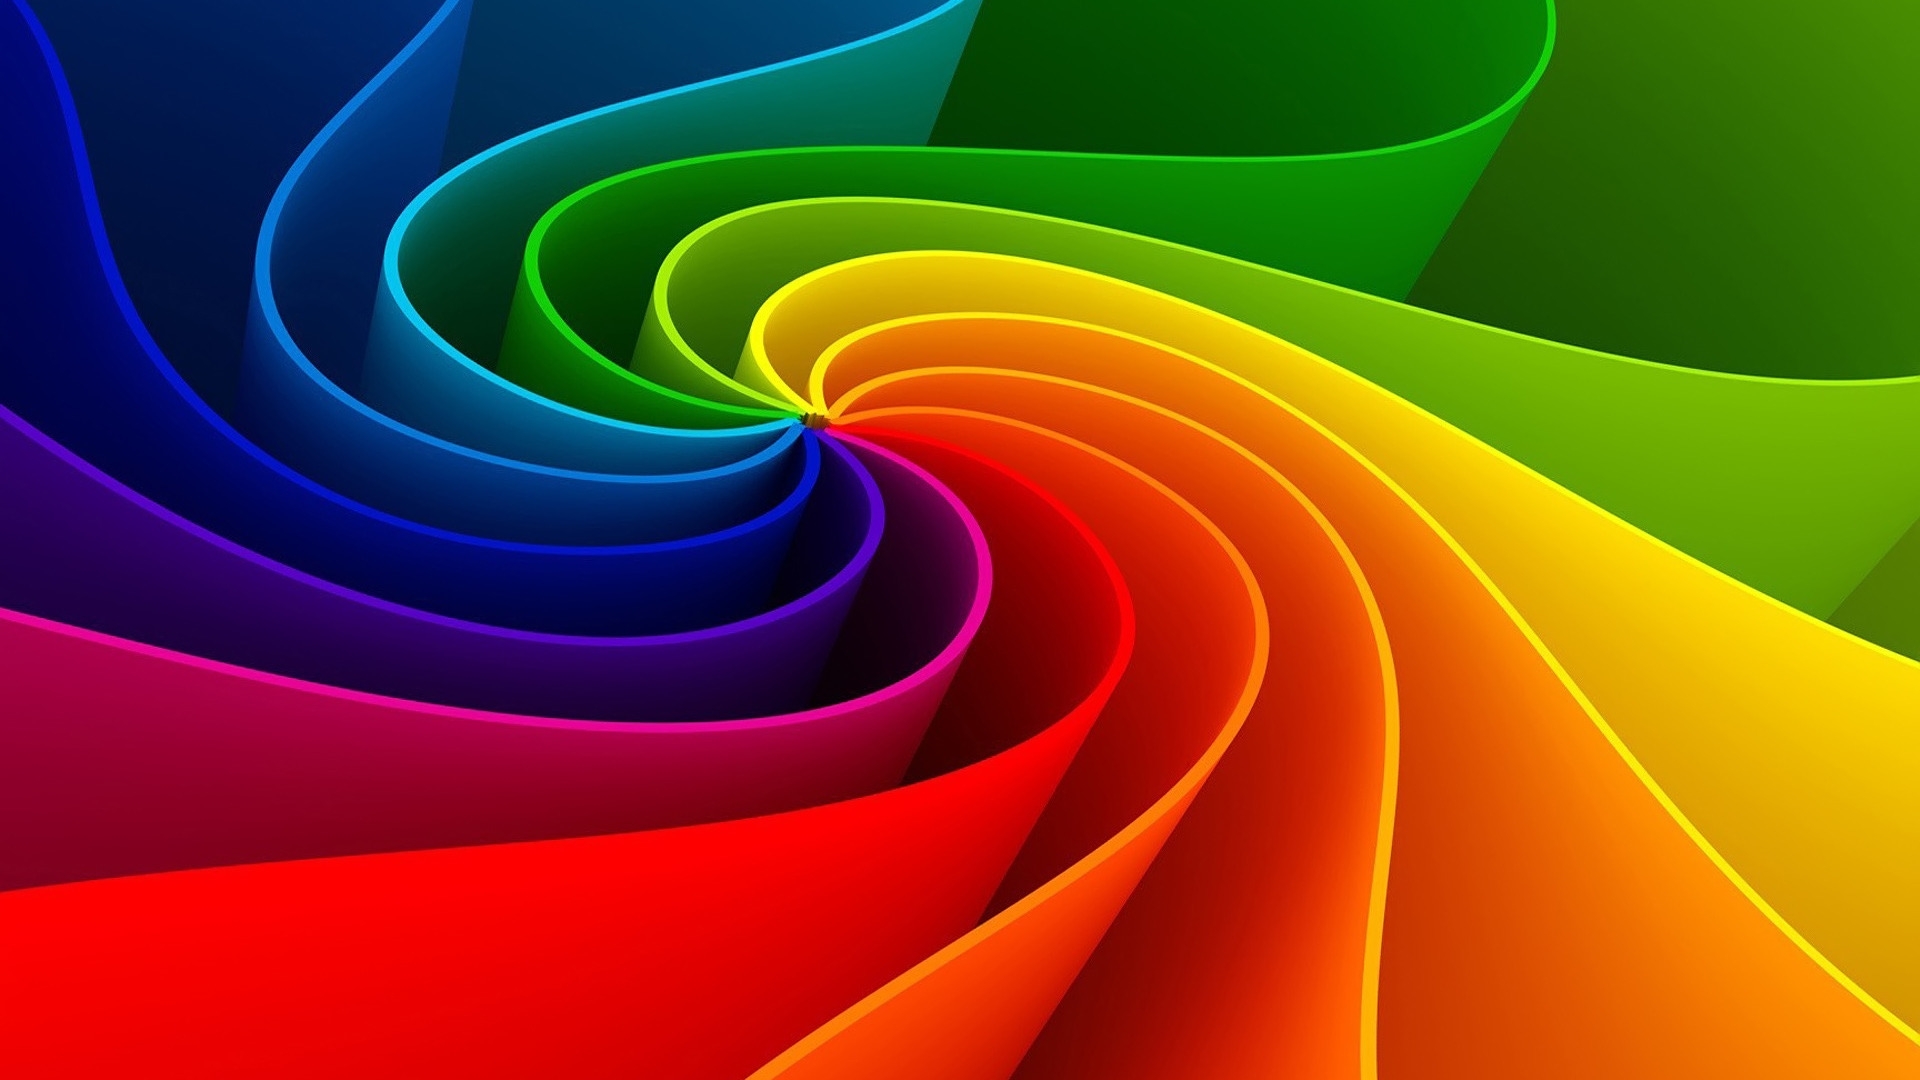 Amazing Abstract Rainbow for 1920 x 1080 HDTV 1080p resolution